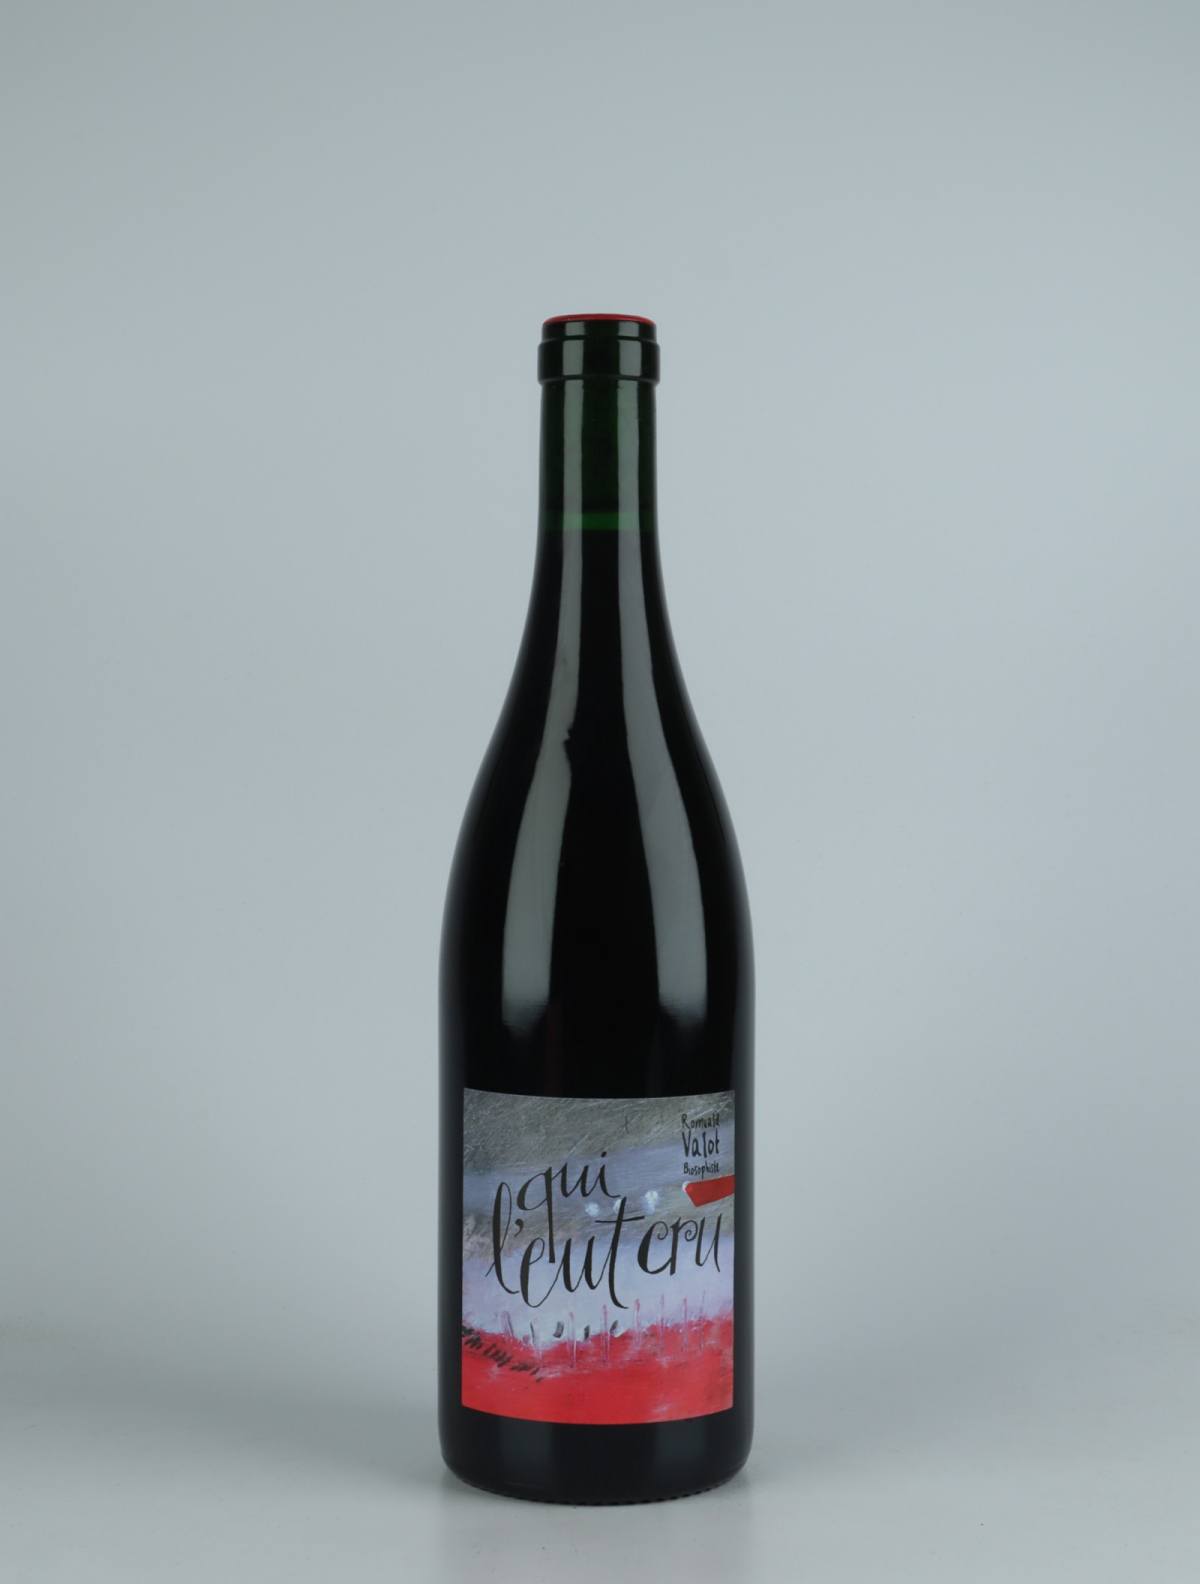 A bottle 2021 Qui l'eut Cru Red wine from Romuald Valot, Beaujolais in France